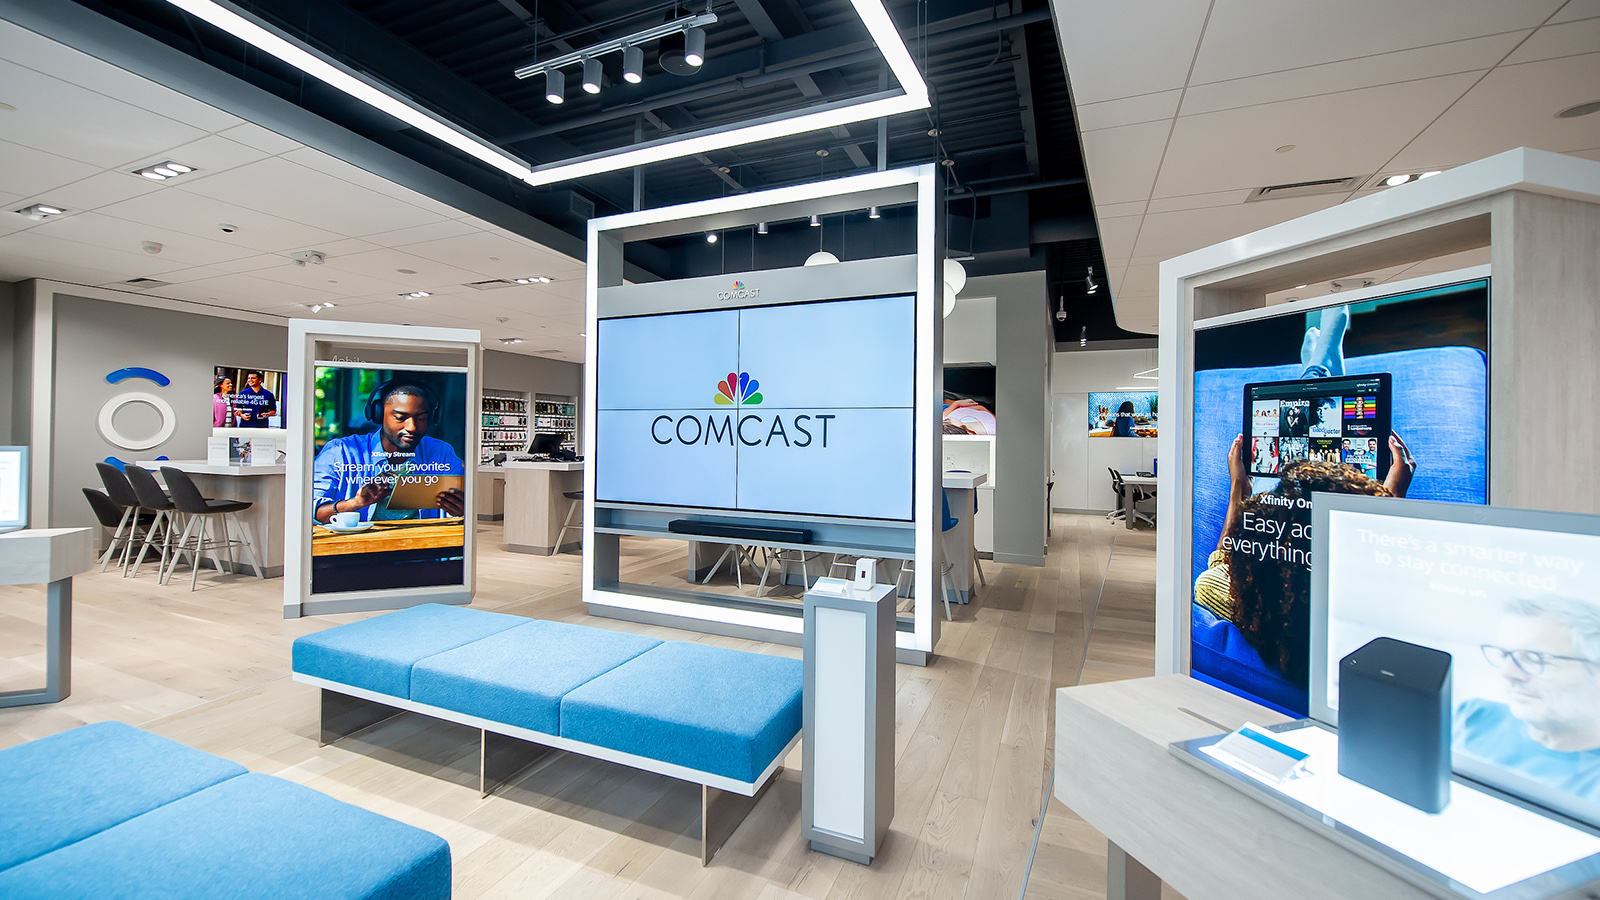 Example of an interior of an Xfinity Store